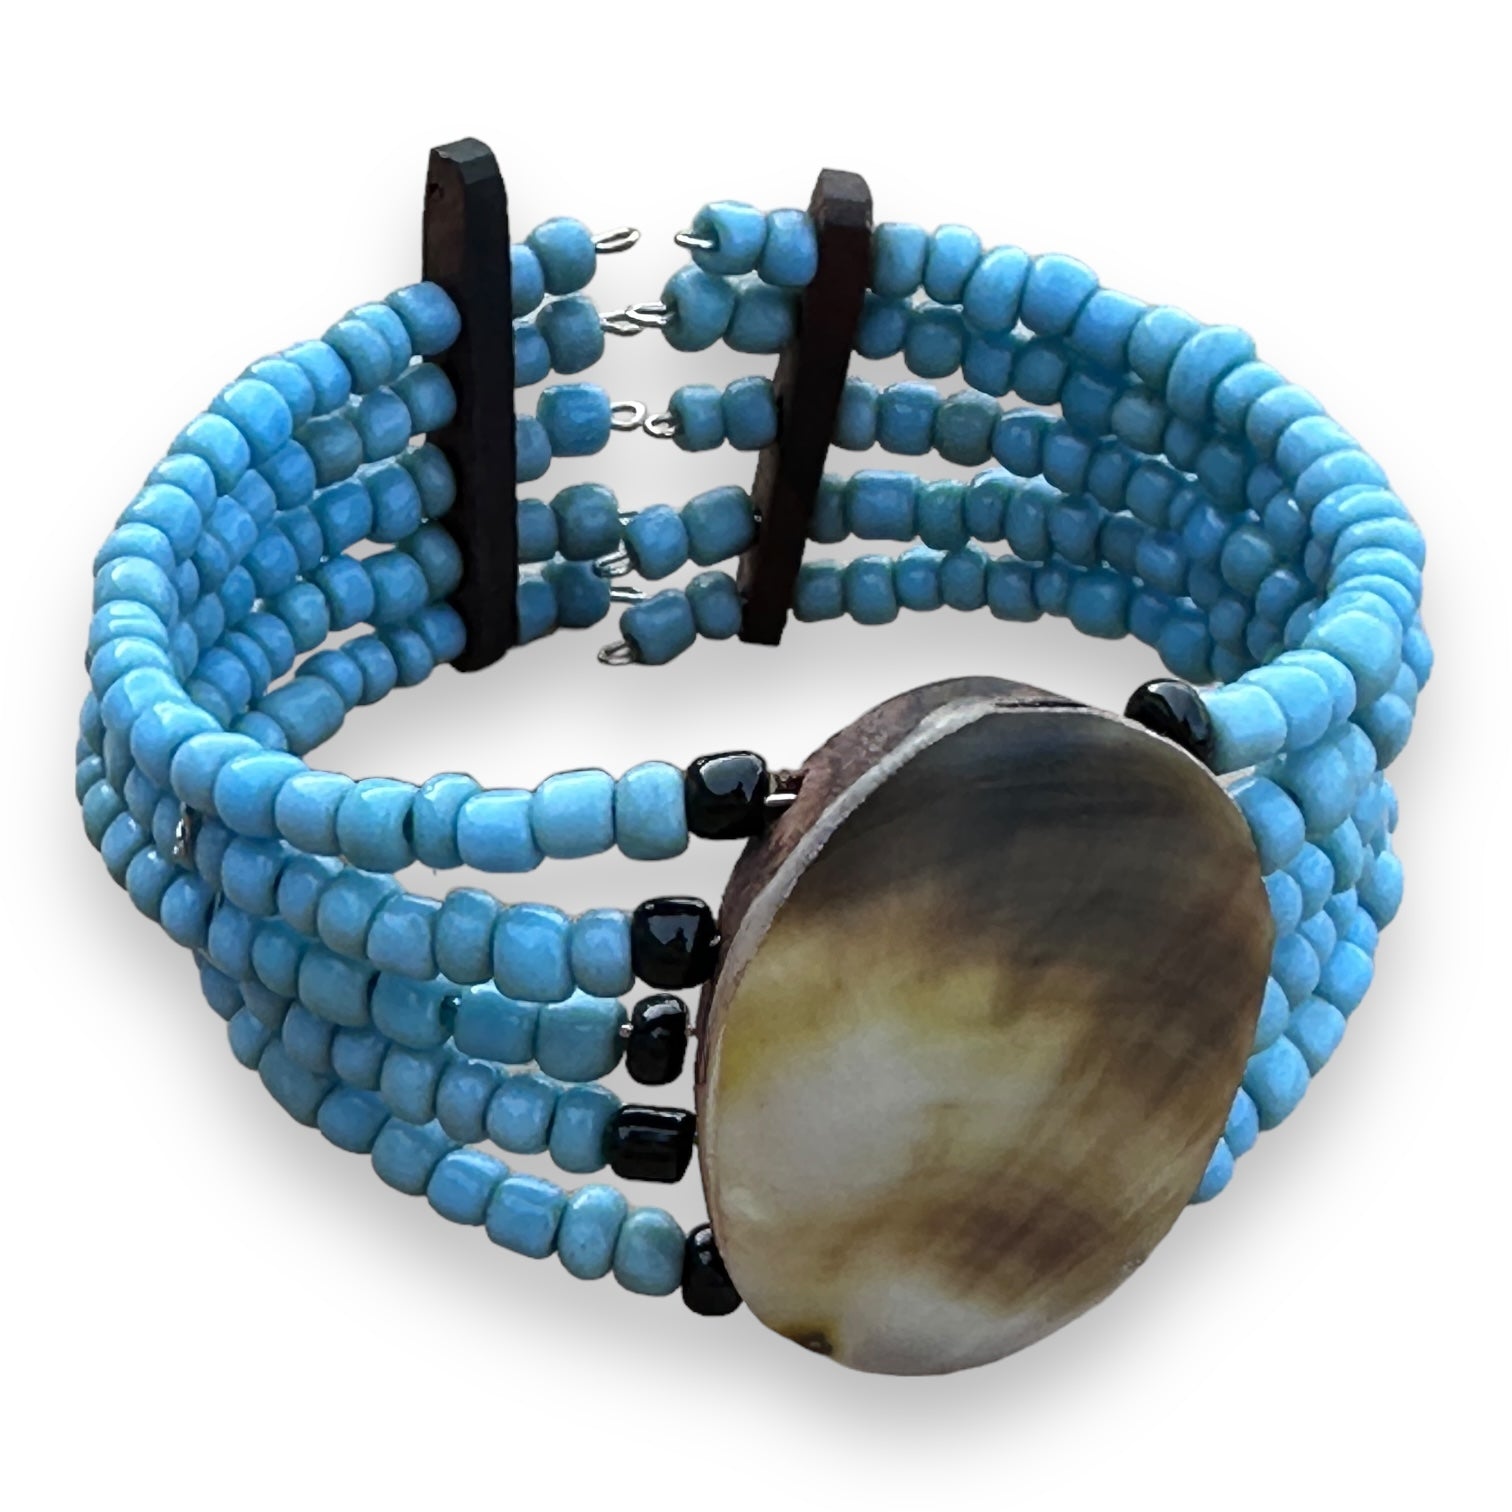 Bead and Wire Cuff Bracelet with Oval River Clam - Turquoise - Mellow Monkey